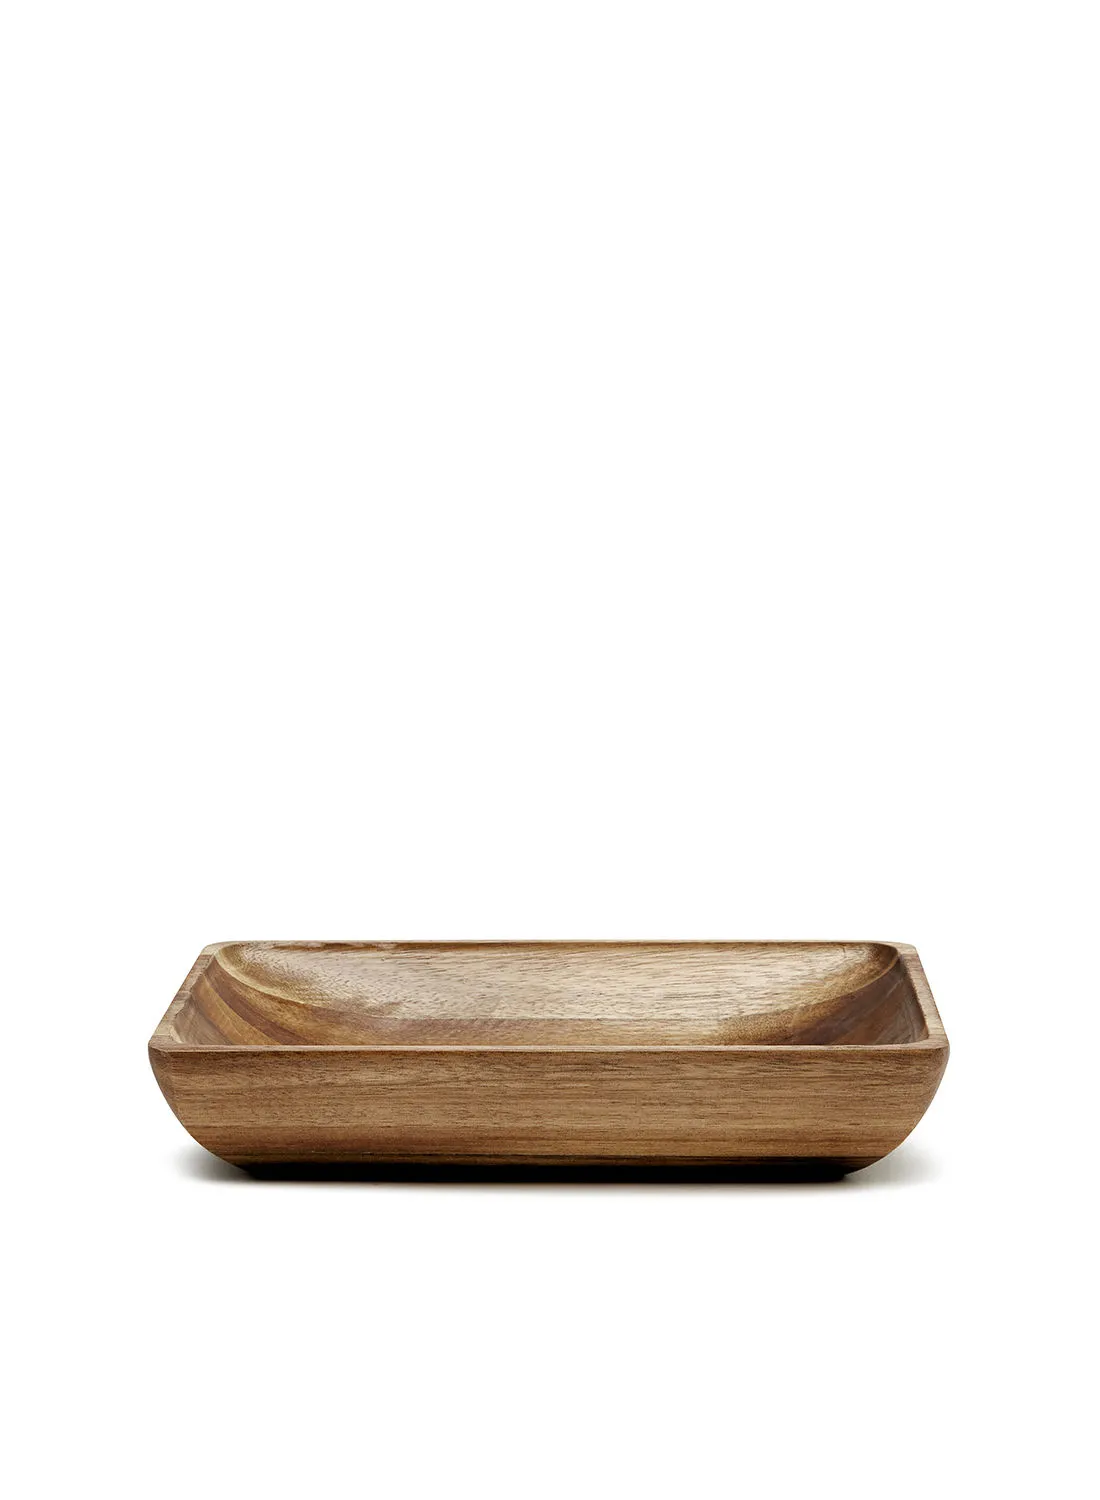 noon east Rectangle Tray Set - Made Of Acacia Wood - Premium Quality - Serving Plate - Serving Dishes - Tray - Wood Platter - By Noon East - Dark Brown